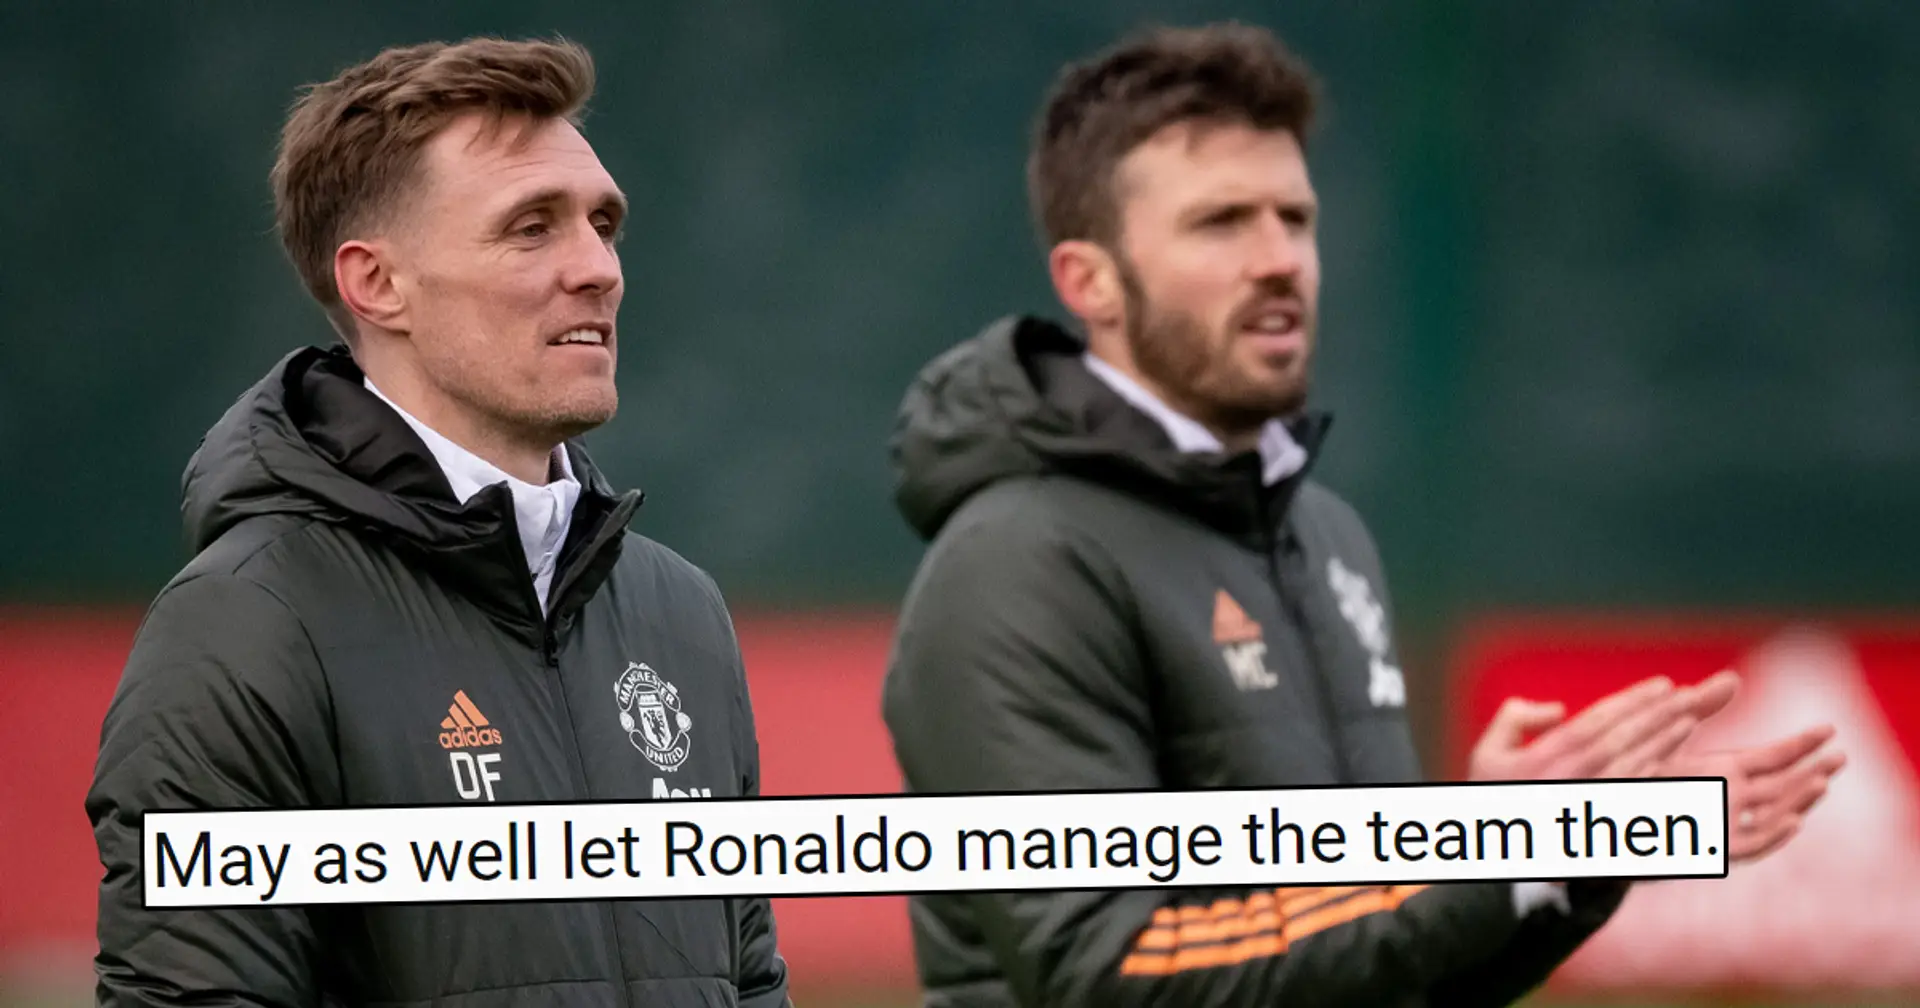 'McFred of management appointments': fans react as Carrick & Fletcher set to take over from Solskjaer